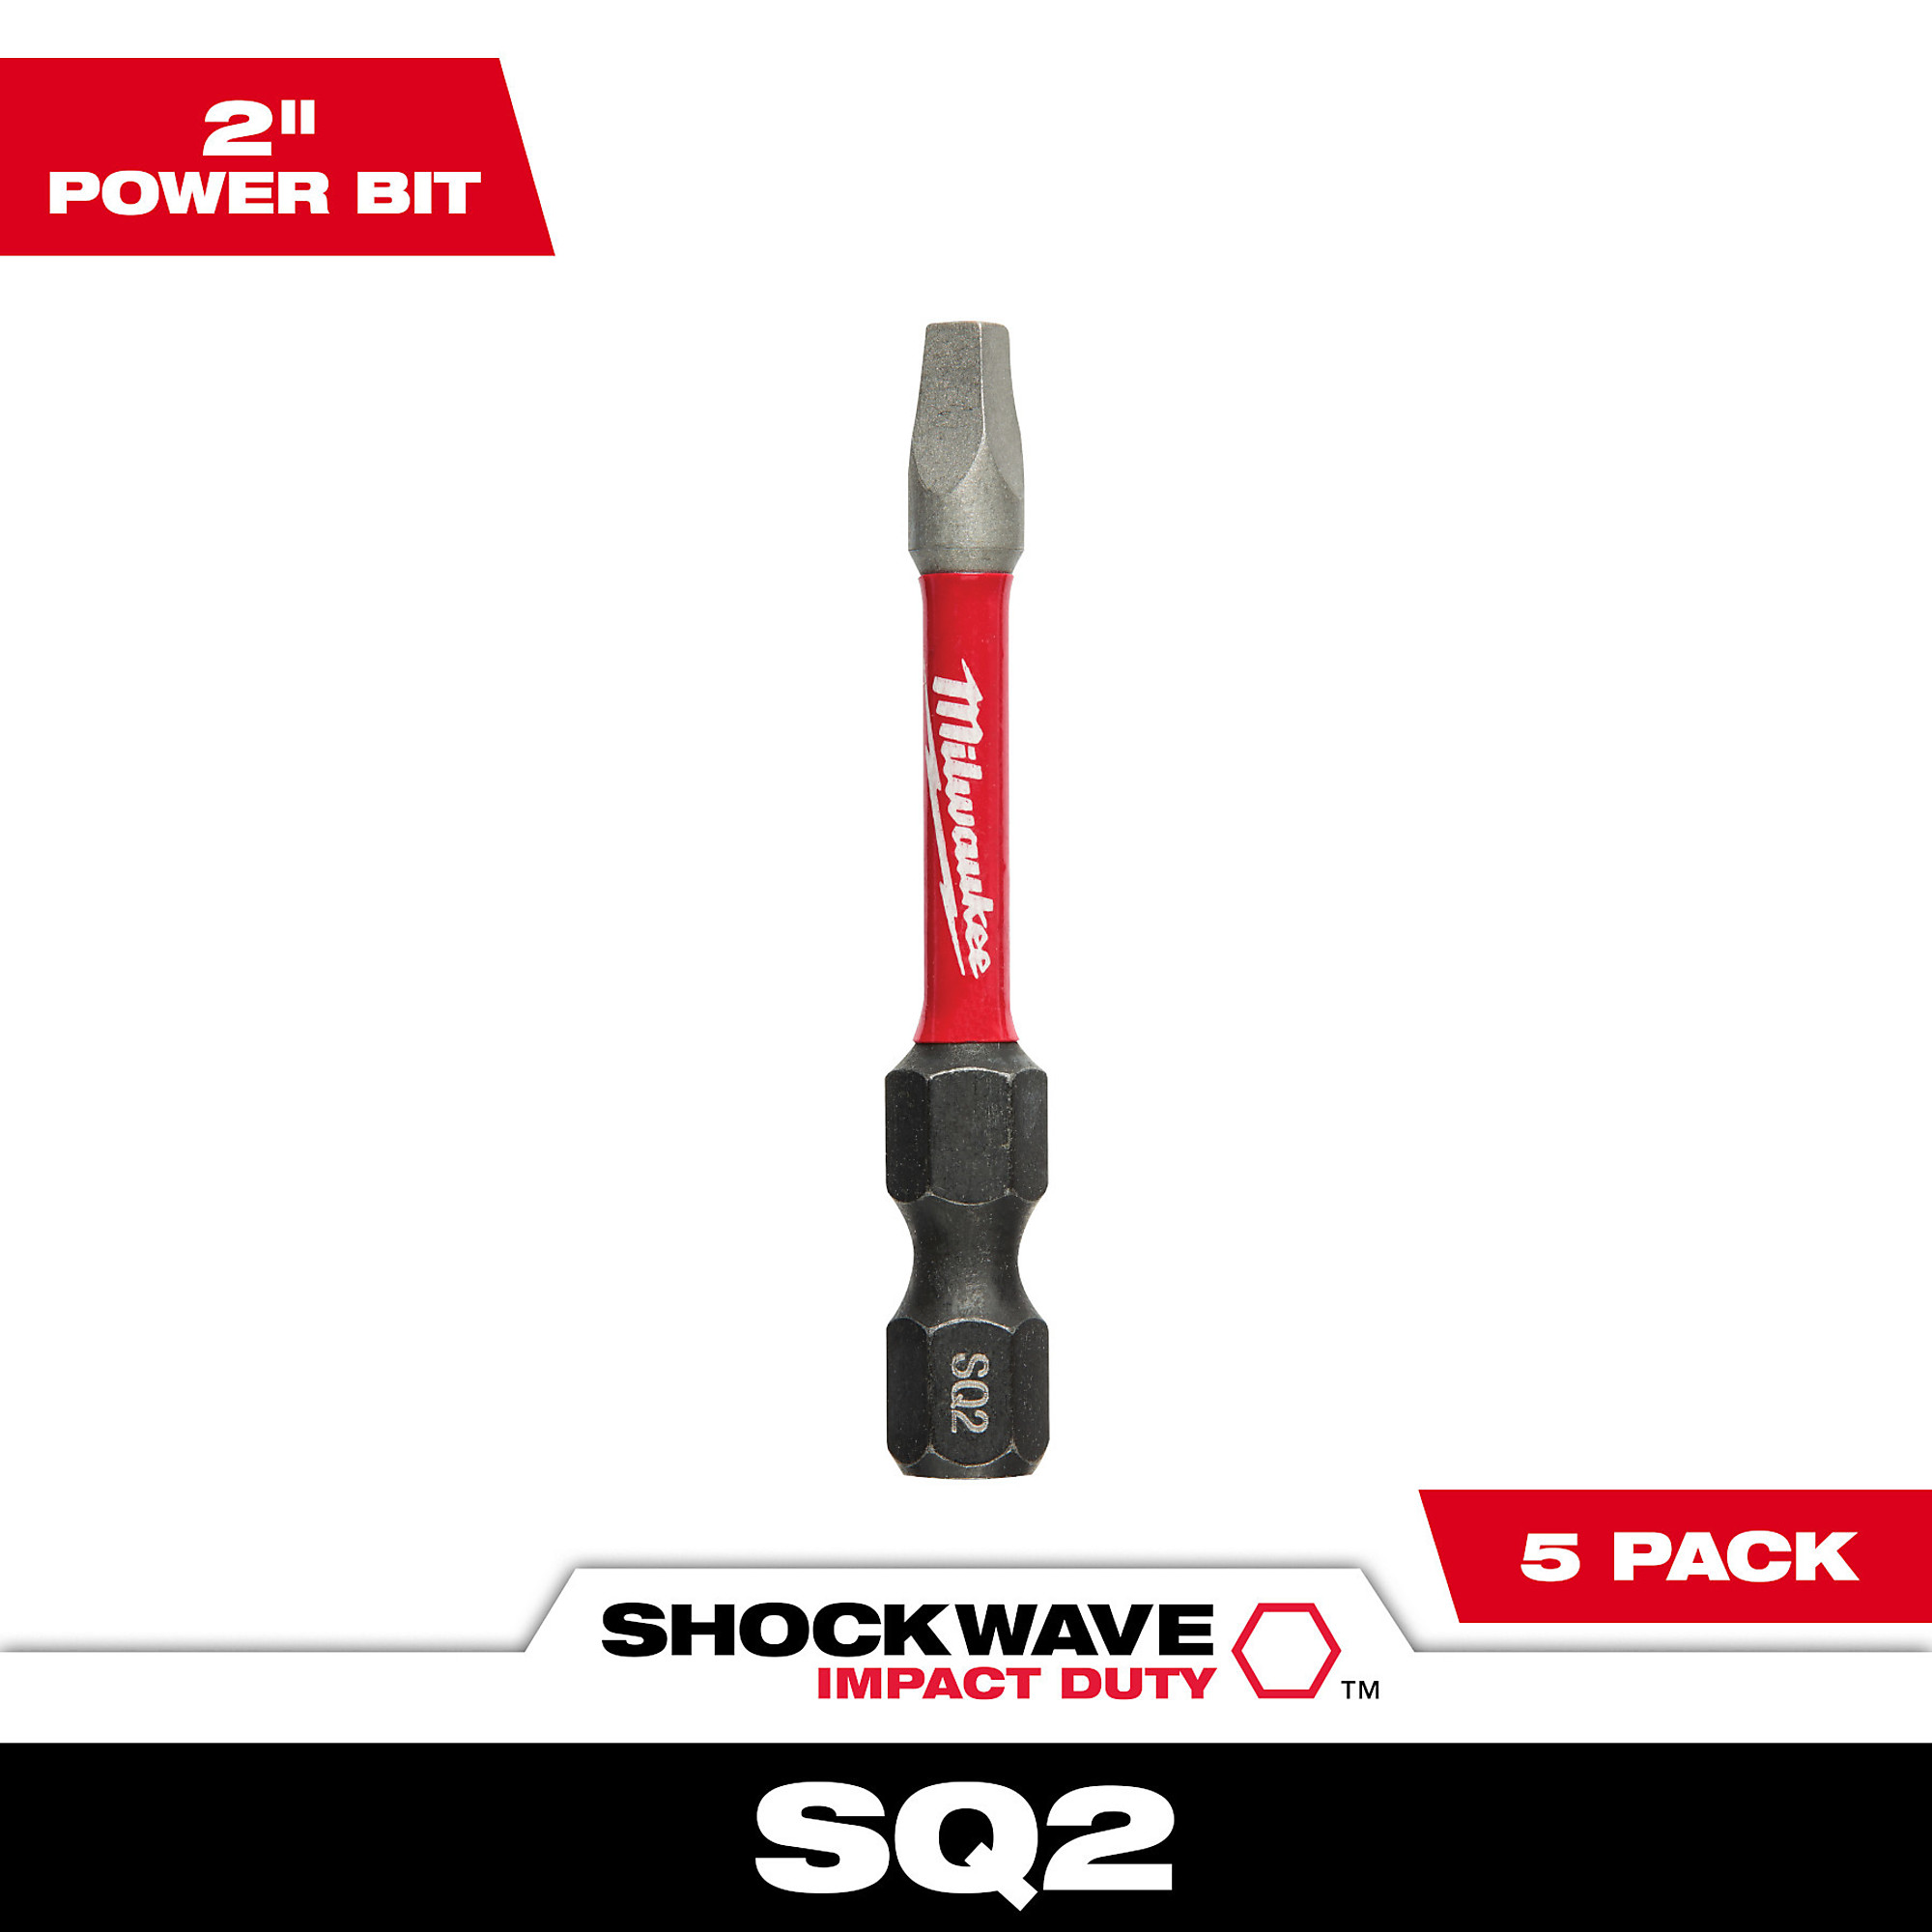 Milwaukee Shockwave Impact Duty Driver Bit, 5-Pack, 2Inch, Square SQ2, Model 48-32-4606